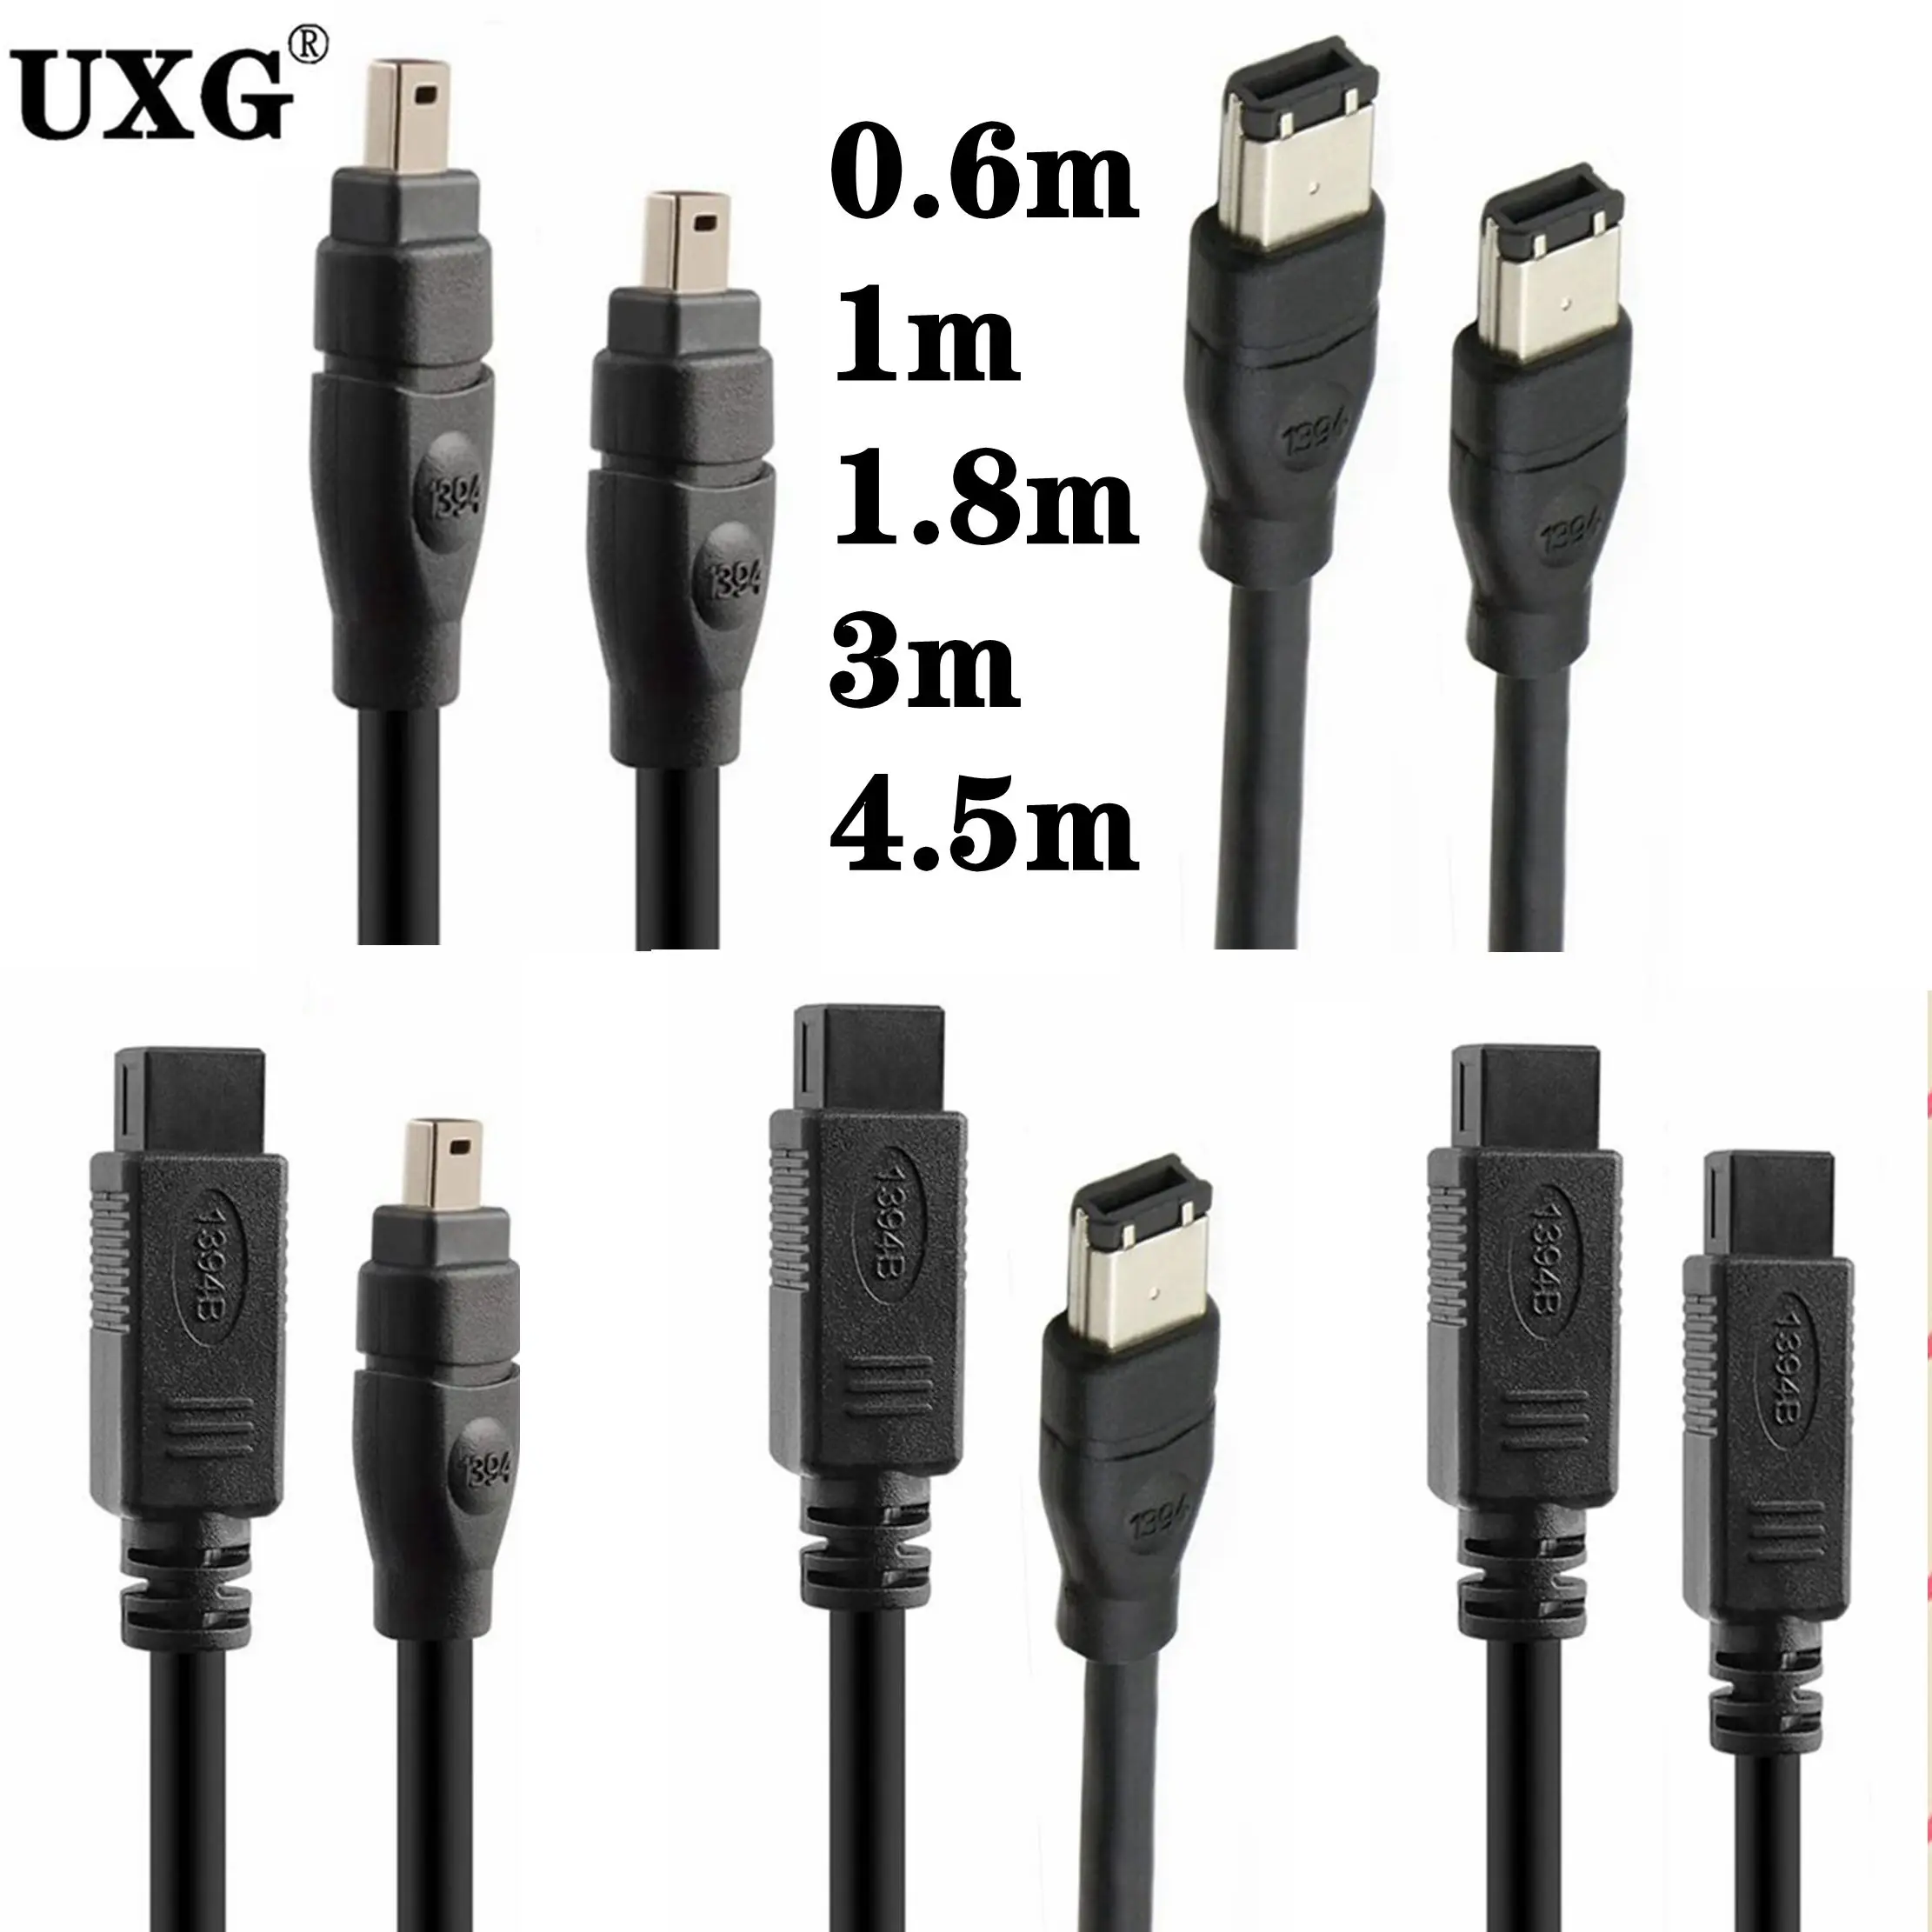 

High Quality FireWire 800 FireWire 400 IEEE 1394B 1394 Cable 9Pin To 4pin 6pin Data Transmission Cable Cord 0.6m 1m 1.8m 3m 5m